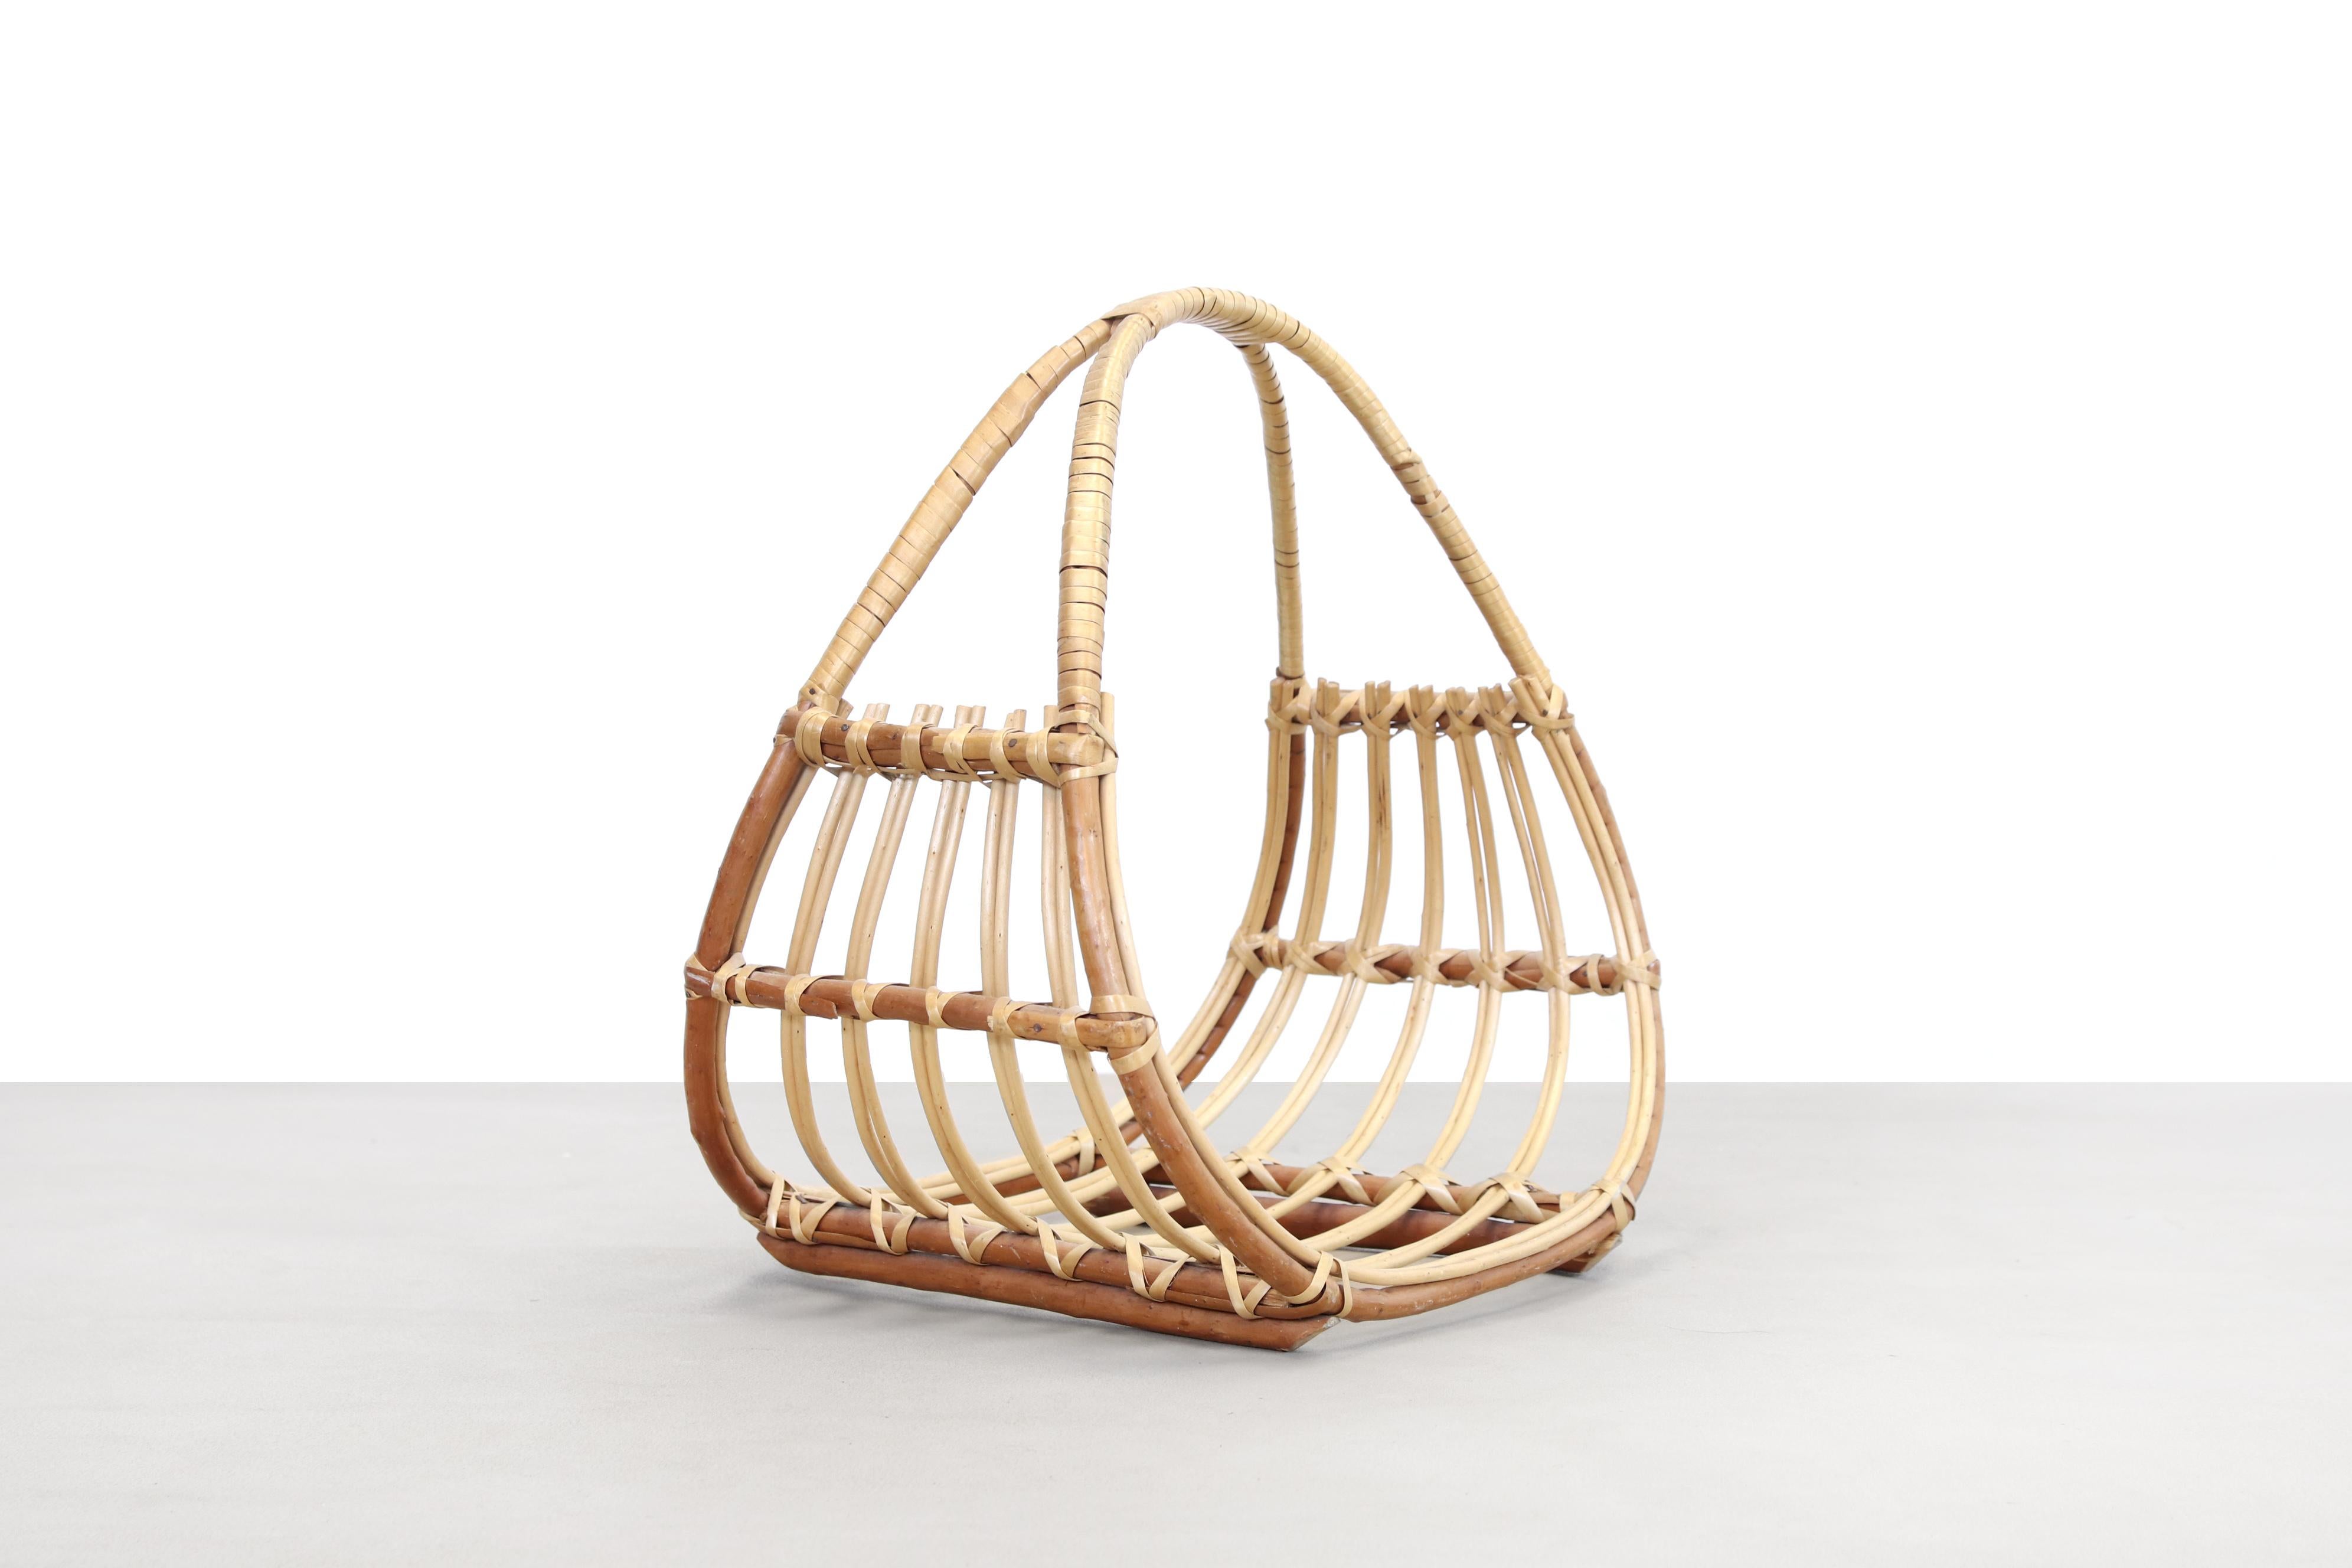 Beautiful rattan basket for magazines, newspapers or books. Versatile in use.
This amazing item was produced in Italy during the 1960s and fits perfectly within the natural minimalist Japandi style.